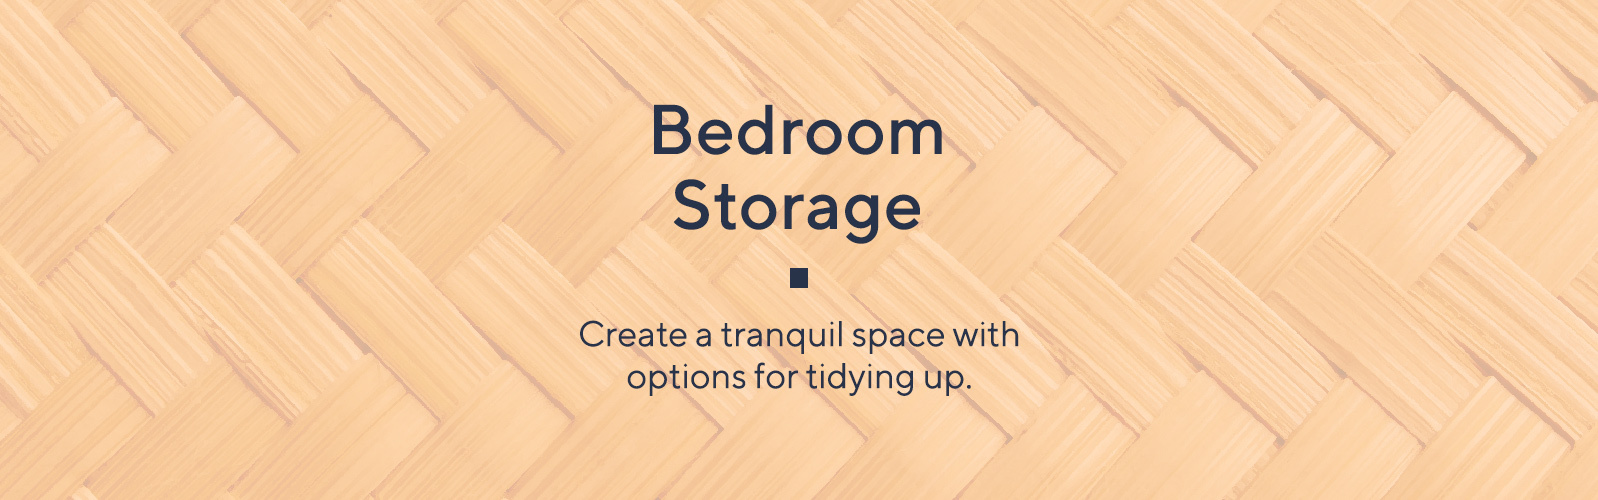 Bedroom Storage  Create a tranquil space with options for tidying up. 